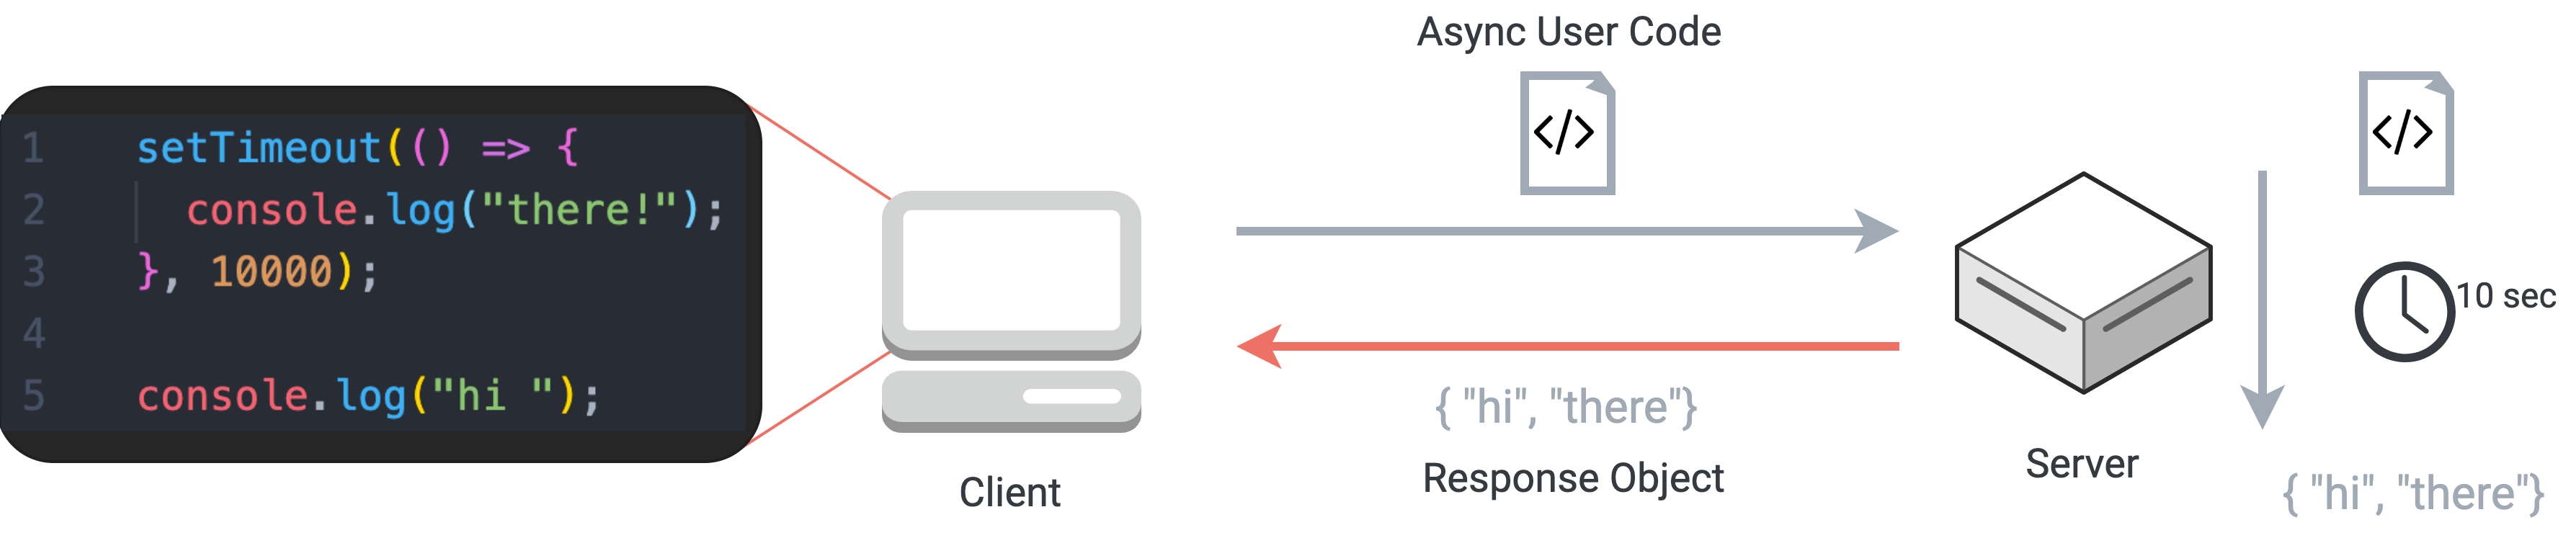 limitations of http for asynchronous user code